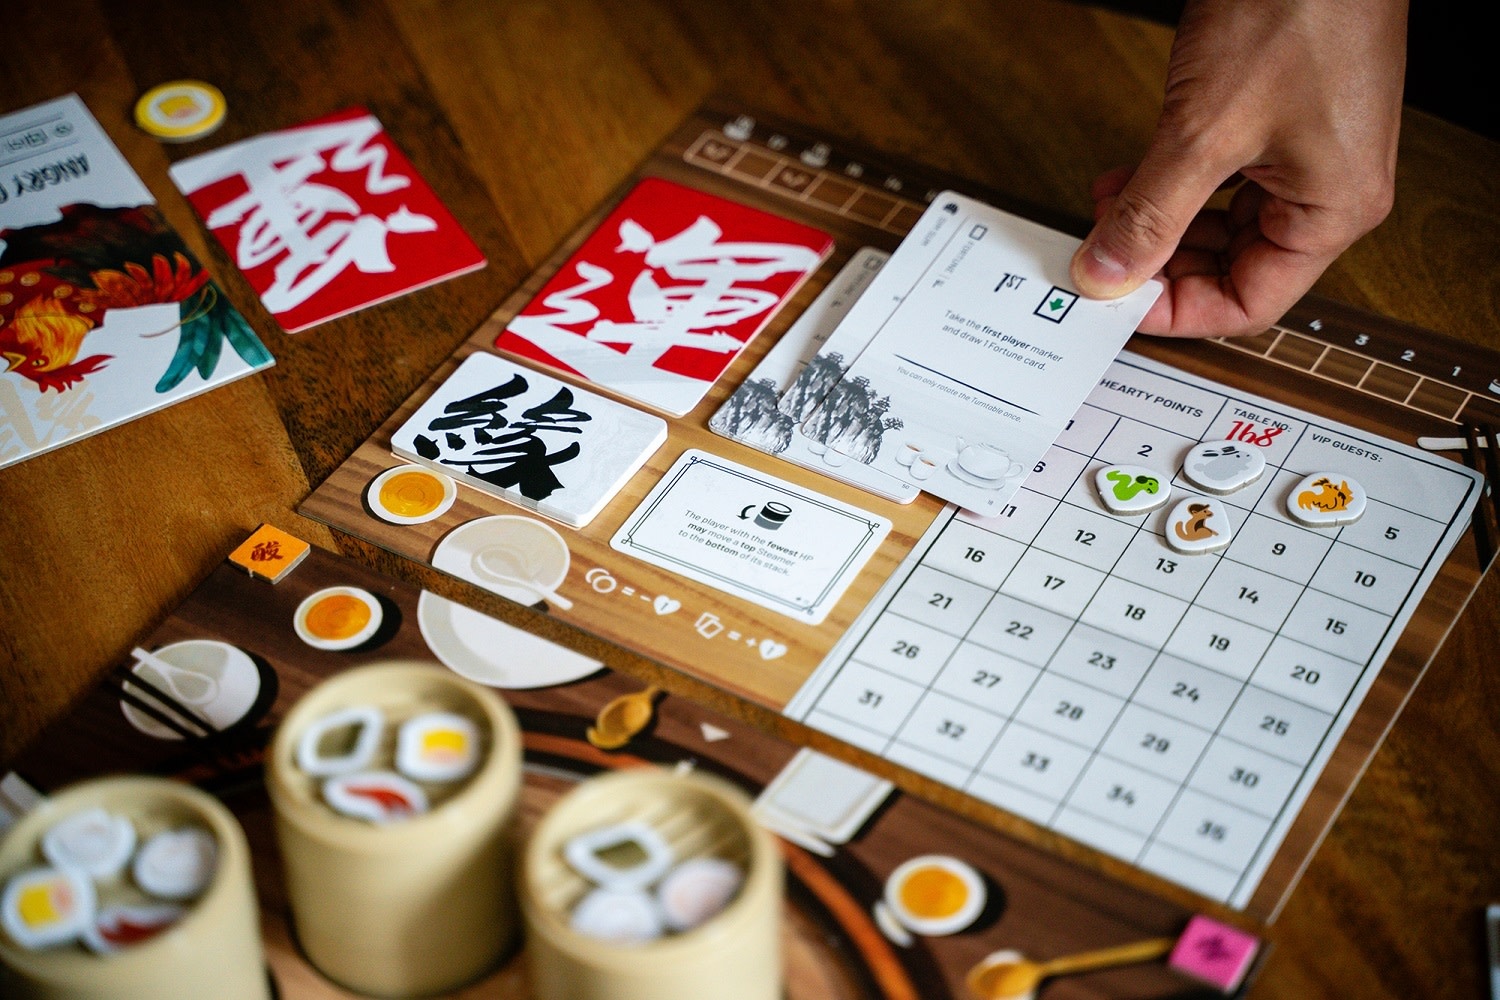 You can play this adorable Vancouver-made dim sum board game